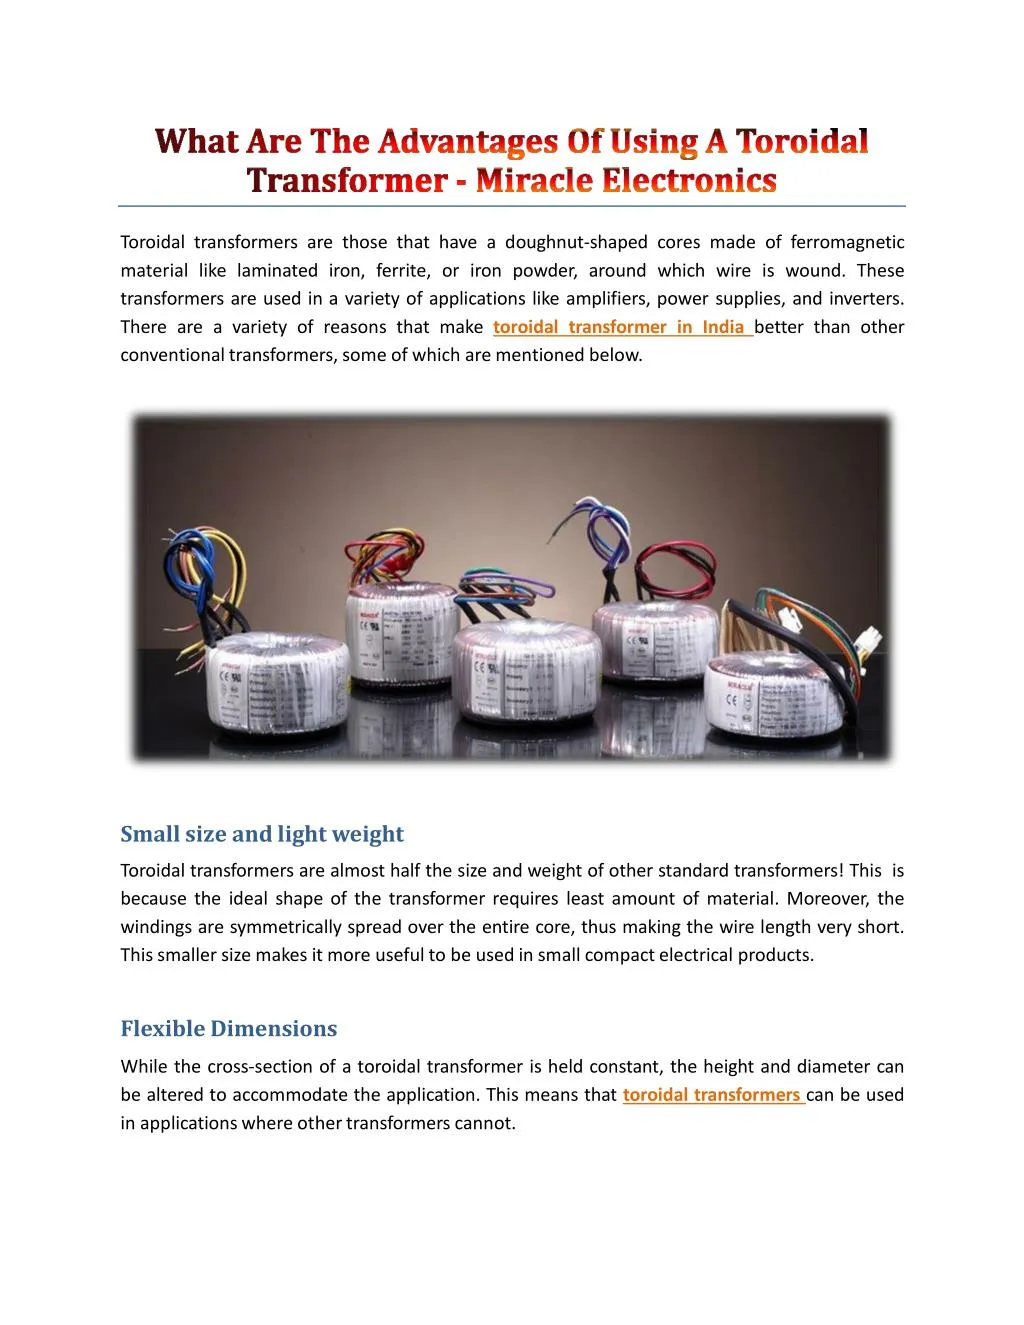 toroidal transformers are those that have